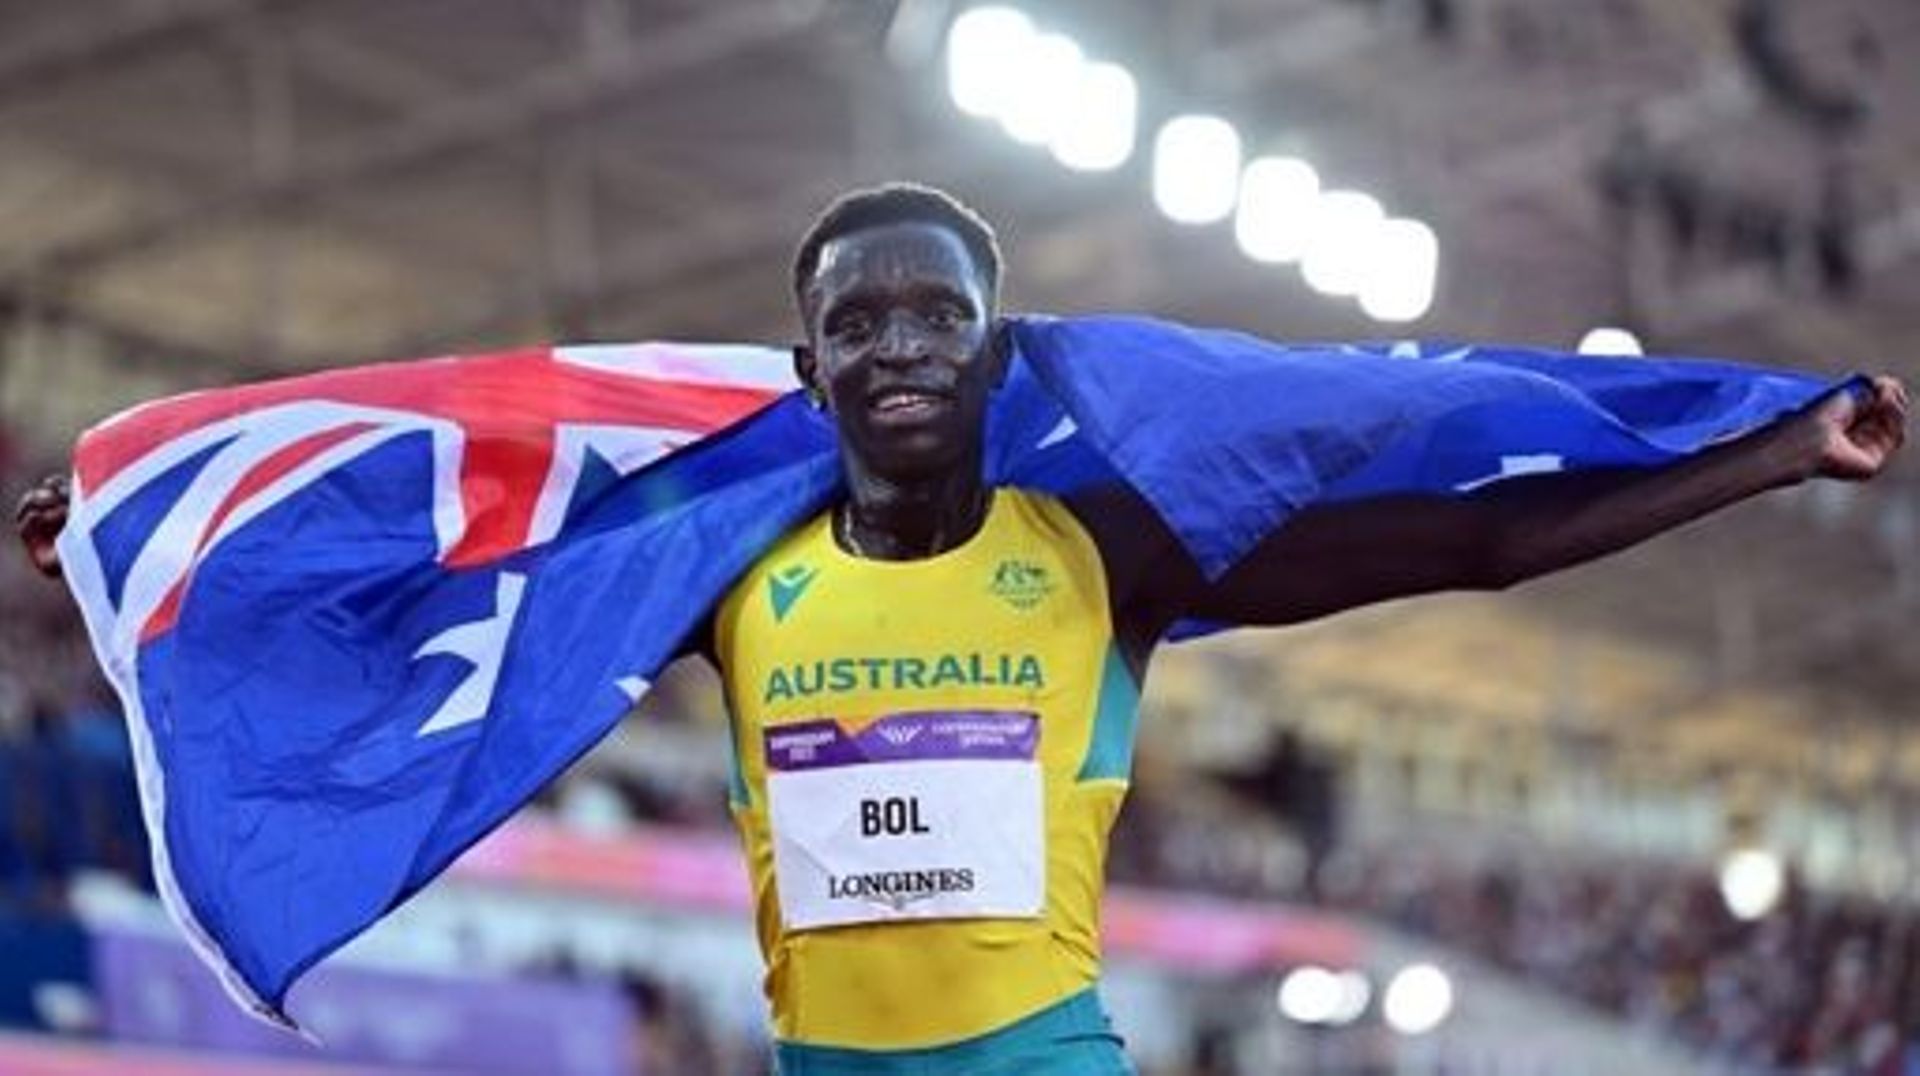 Australia's Peter Bol celebrates second place and taking the silver medal in during the men's 800m final athletics event at the Alexander Stadium, in Birmingham on day ten of the Commonwealth Games in Birmingham, central England, on August 7, 2022.  Glyn 